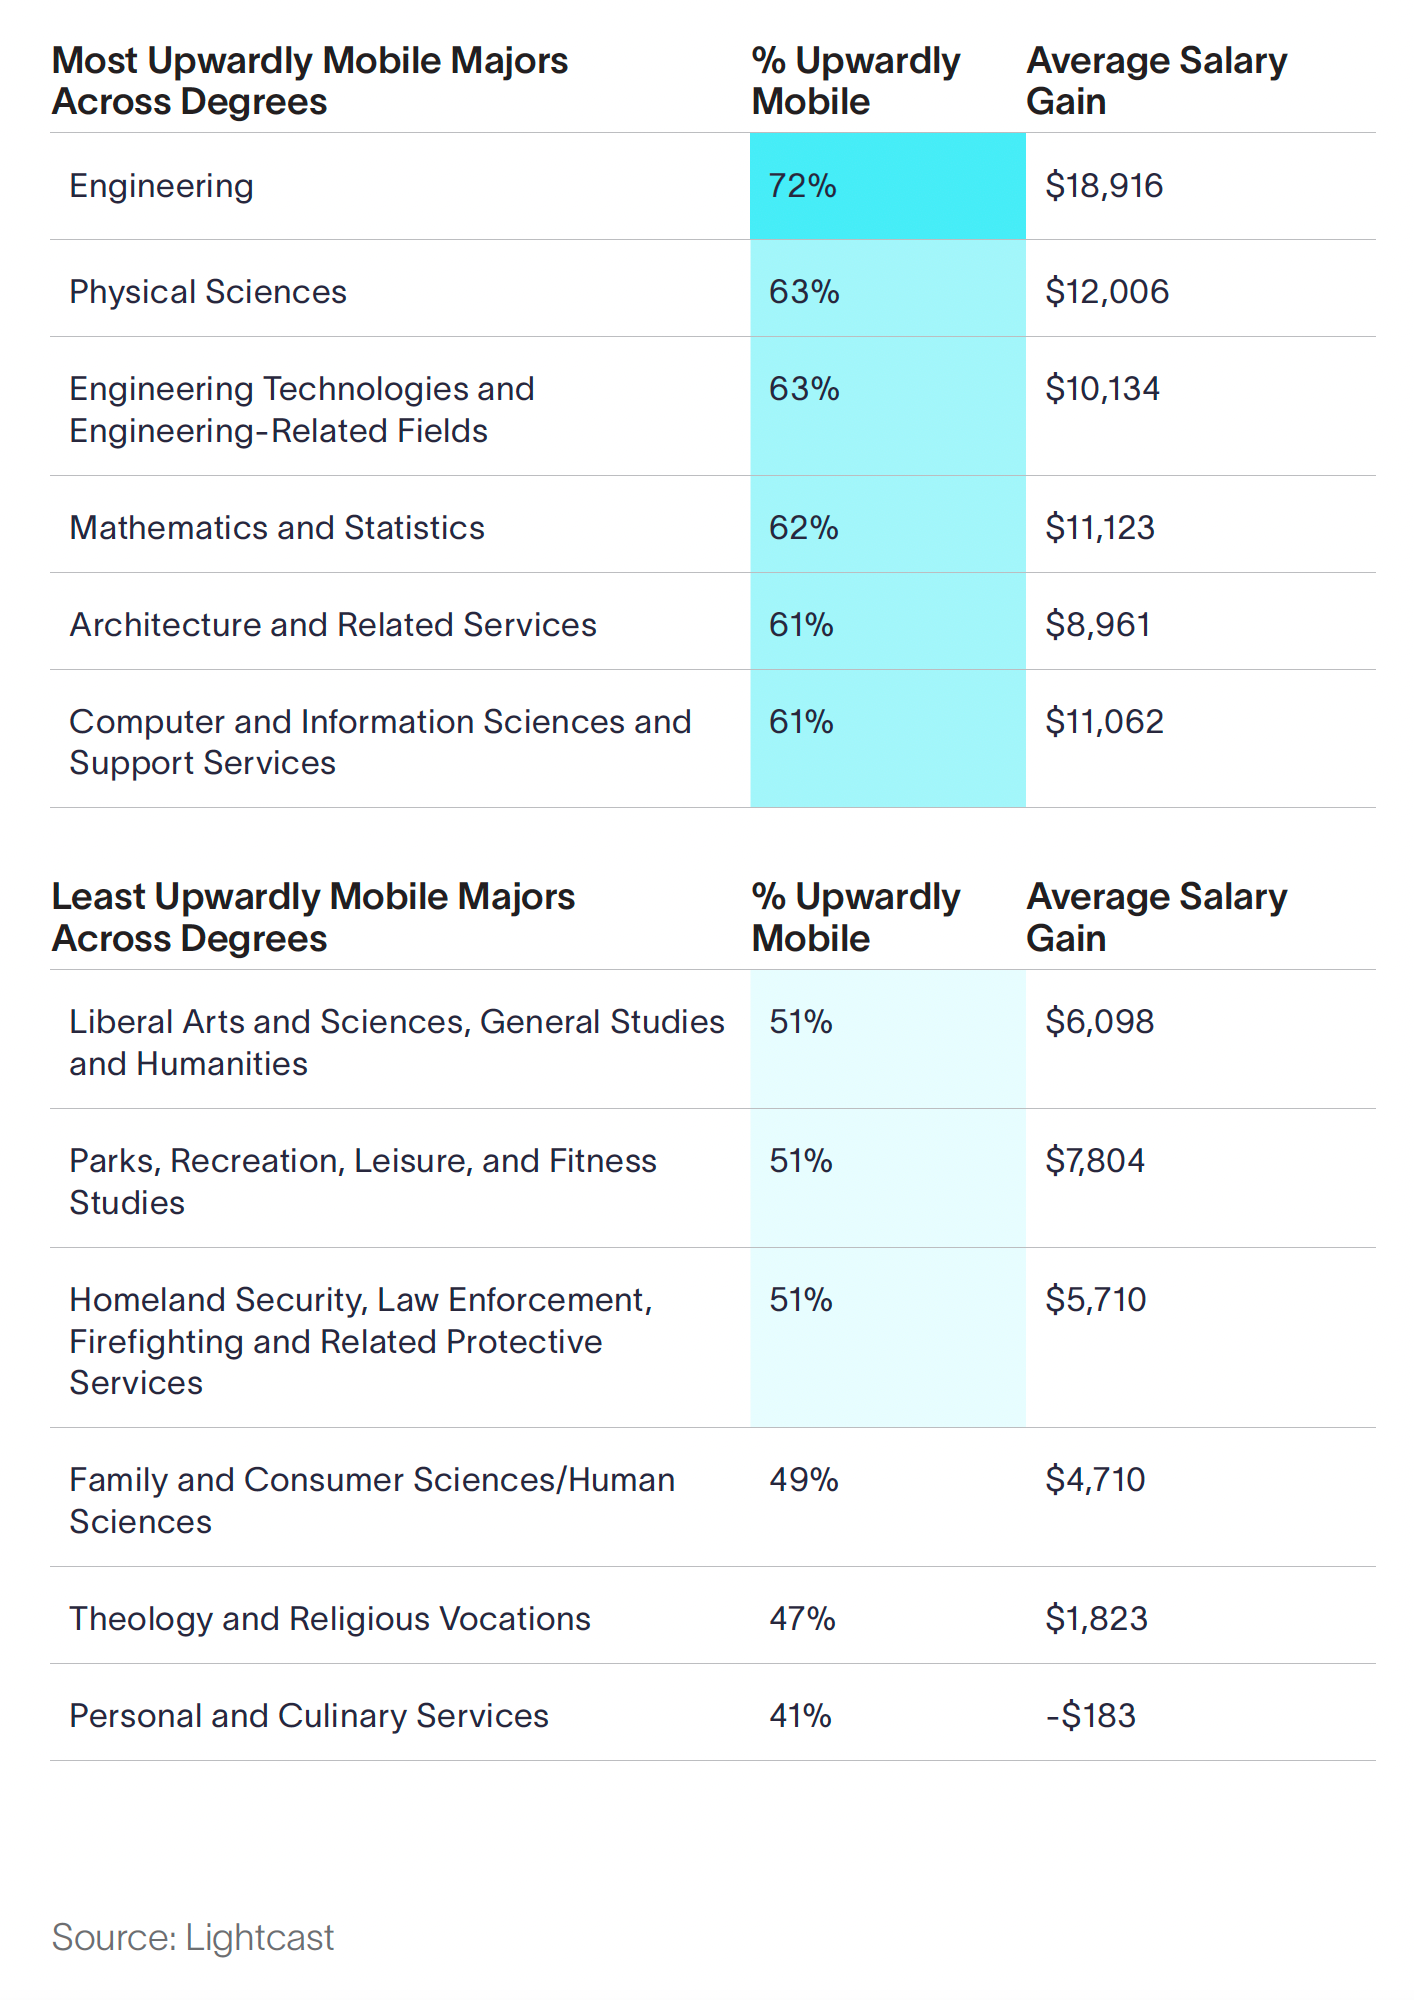 table showing the most and least upwardly mobile degrees across all adult learners